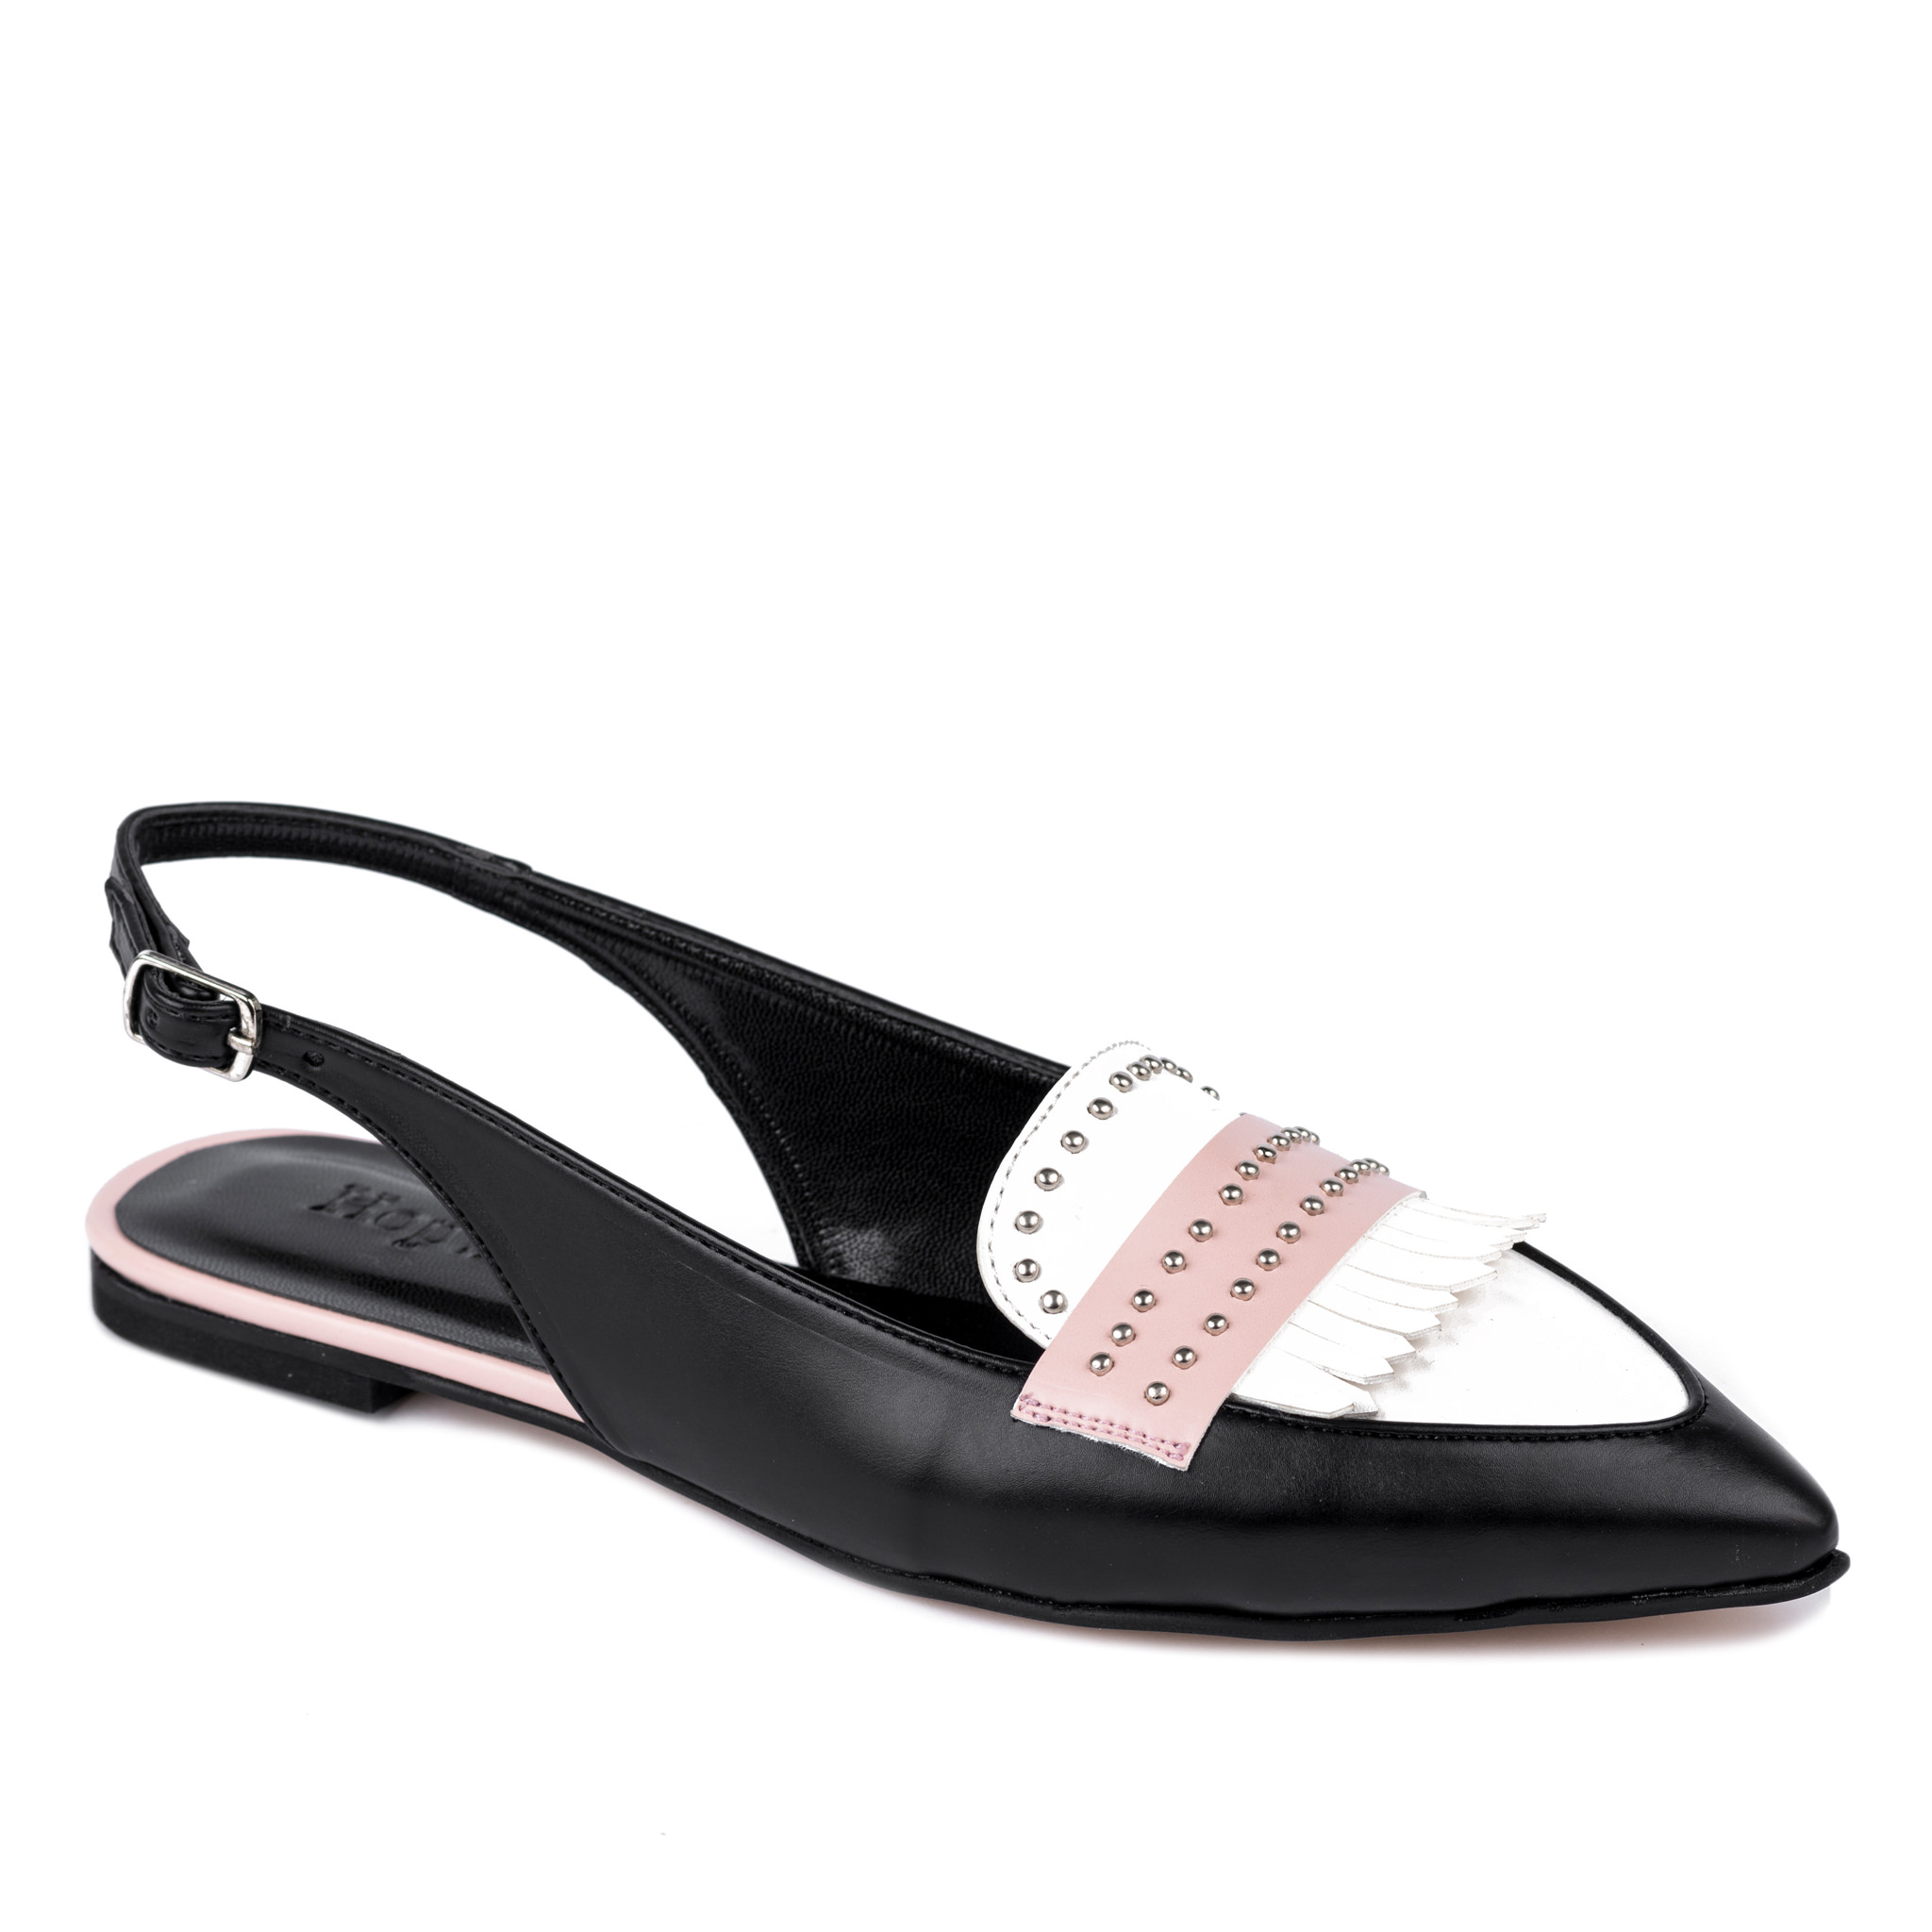 POINTED FLAT SANDALS WITH RIVETS - BLACK